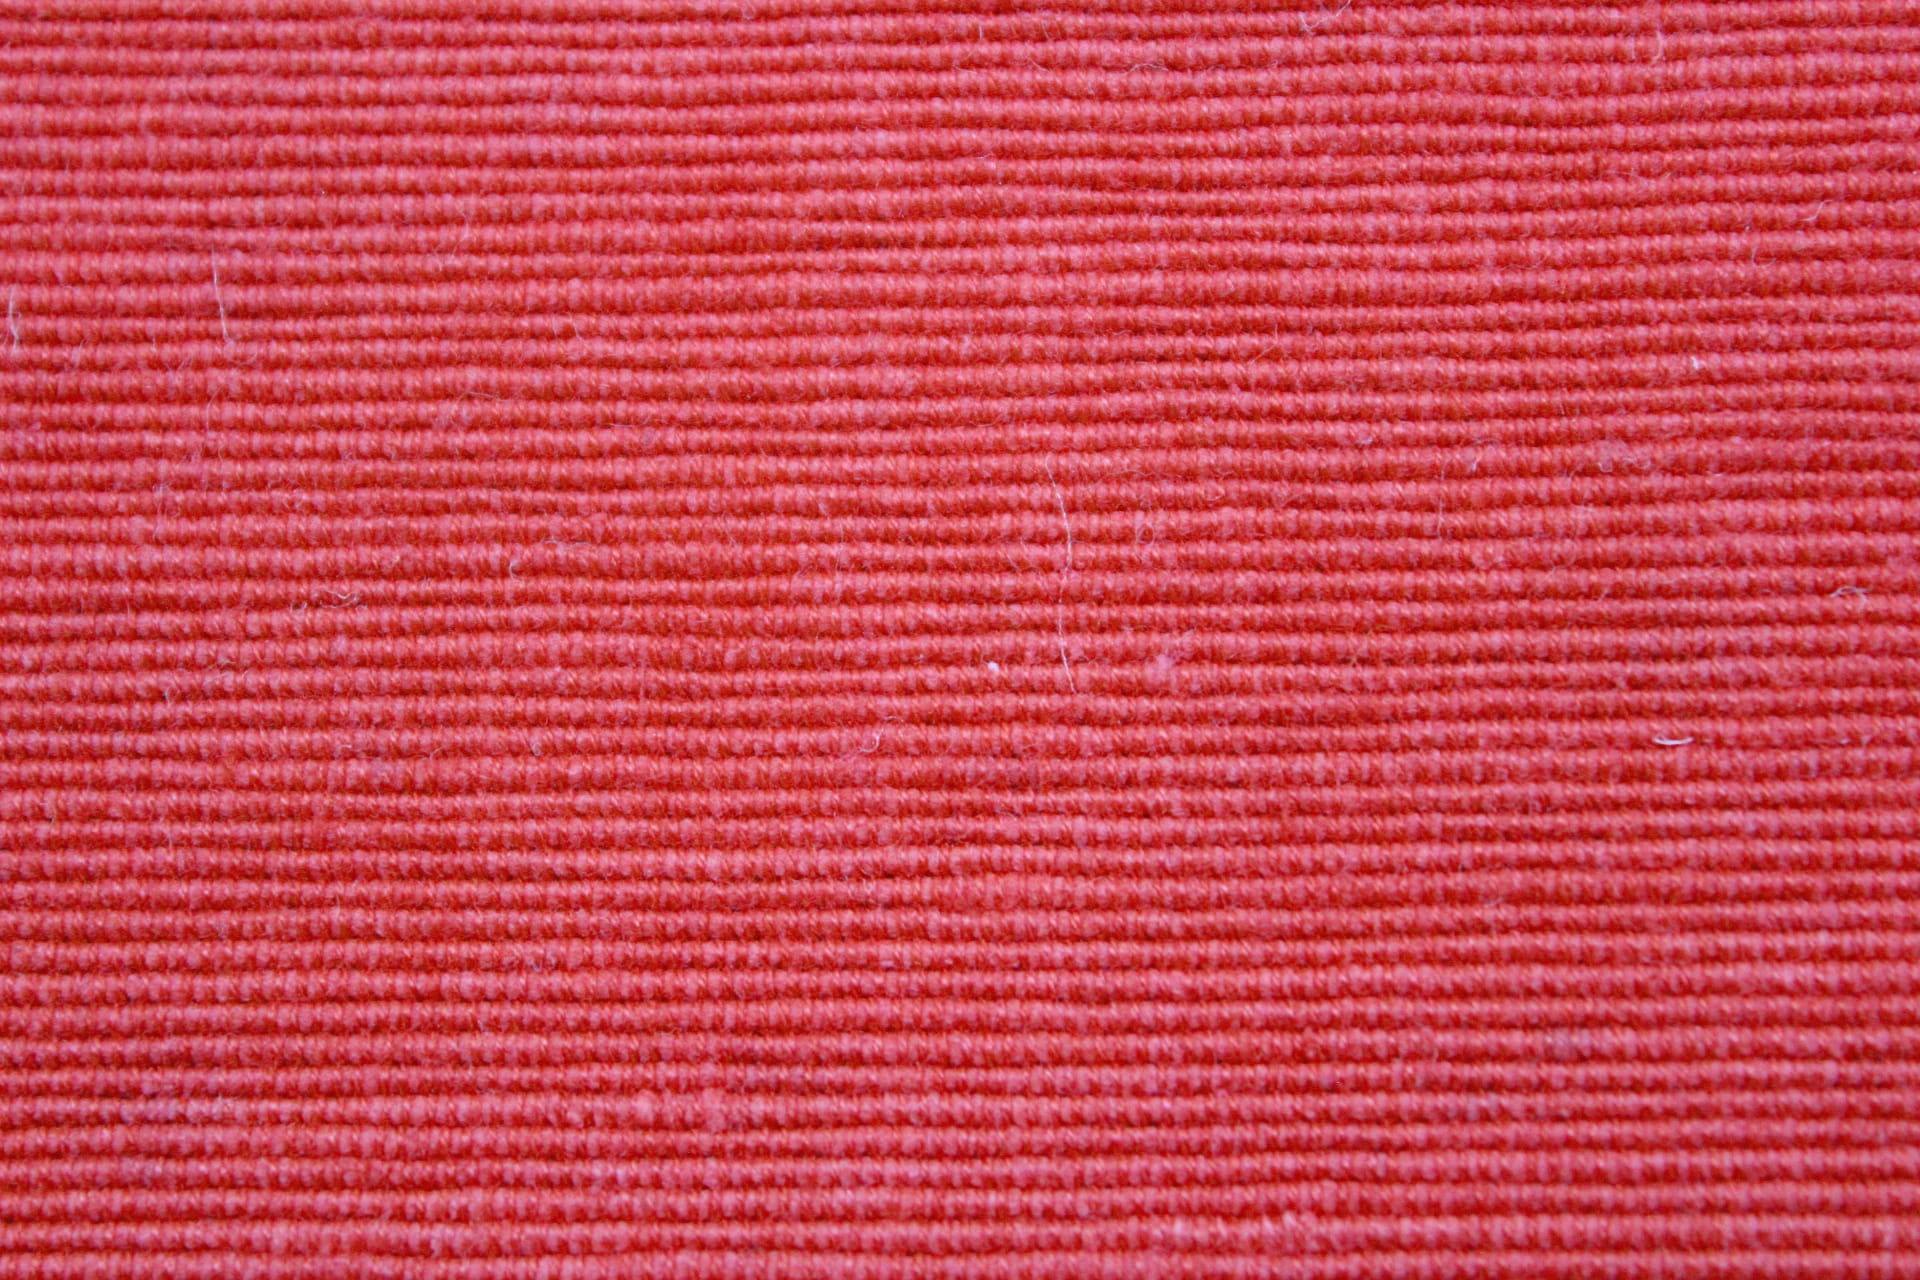 Red Handloom Corded Weave 330 GSM Plain Cotton Fabric (122 cms) online in India